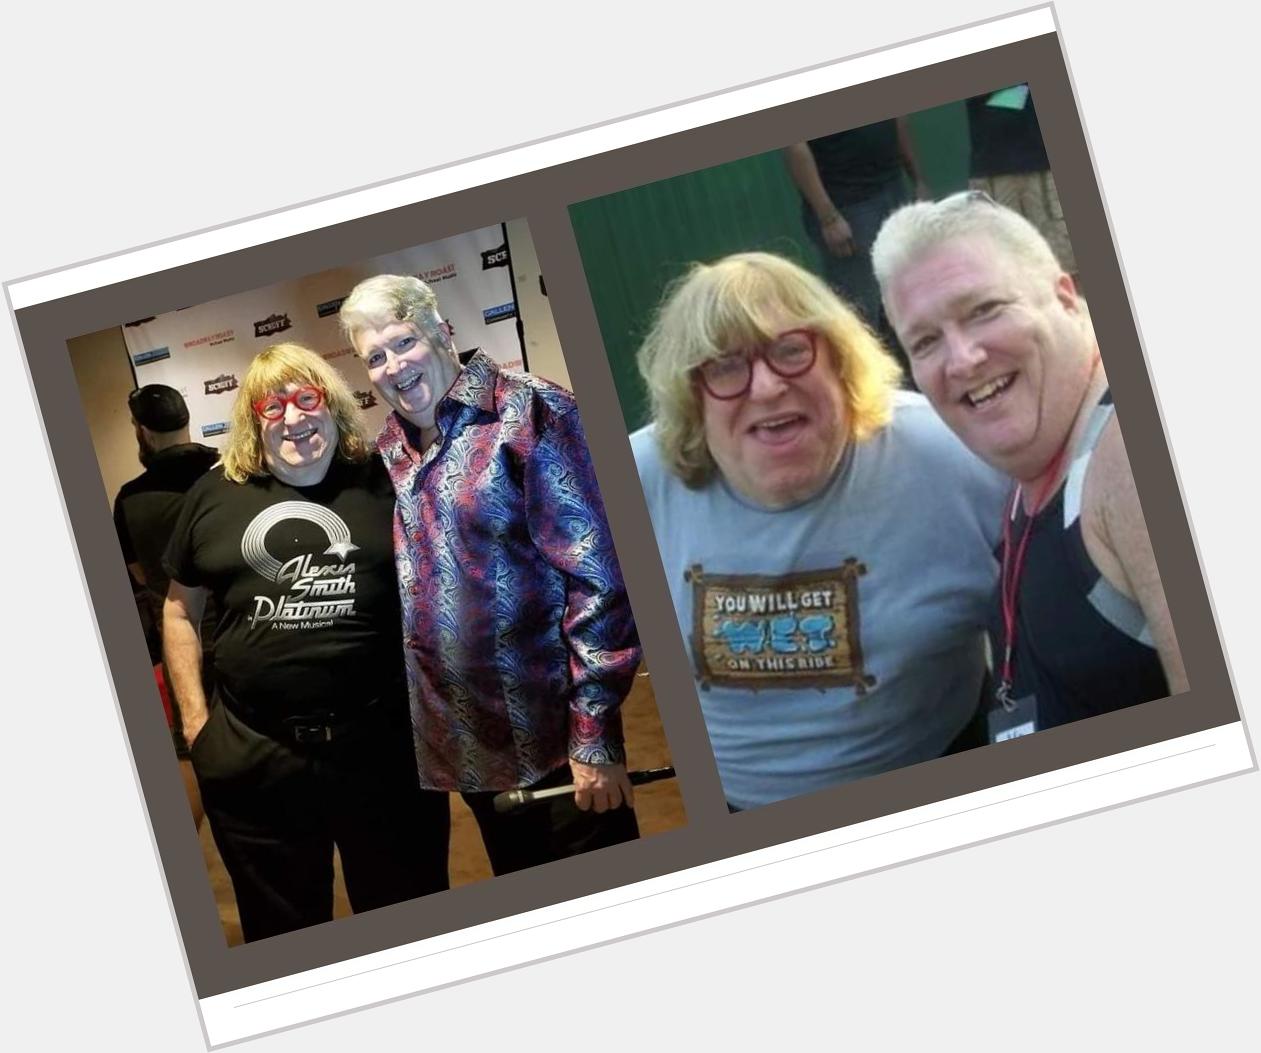 Happy birthday Bruce Vilanch

Have a good one 